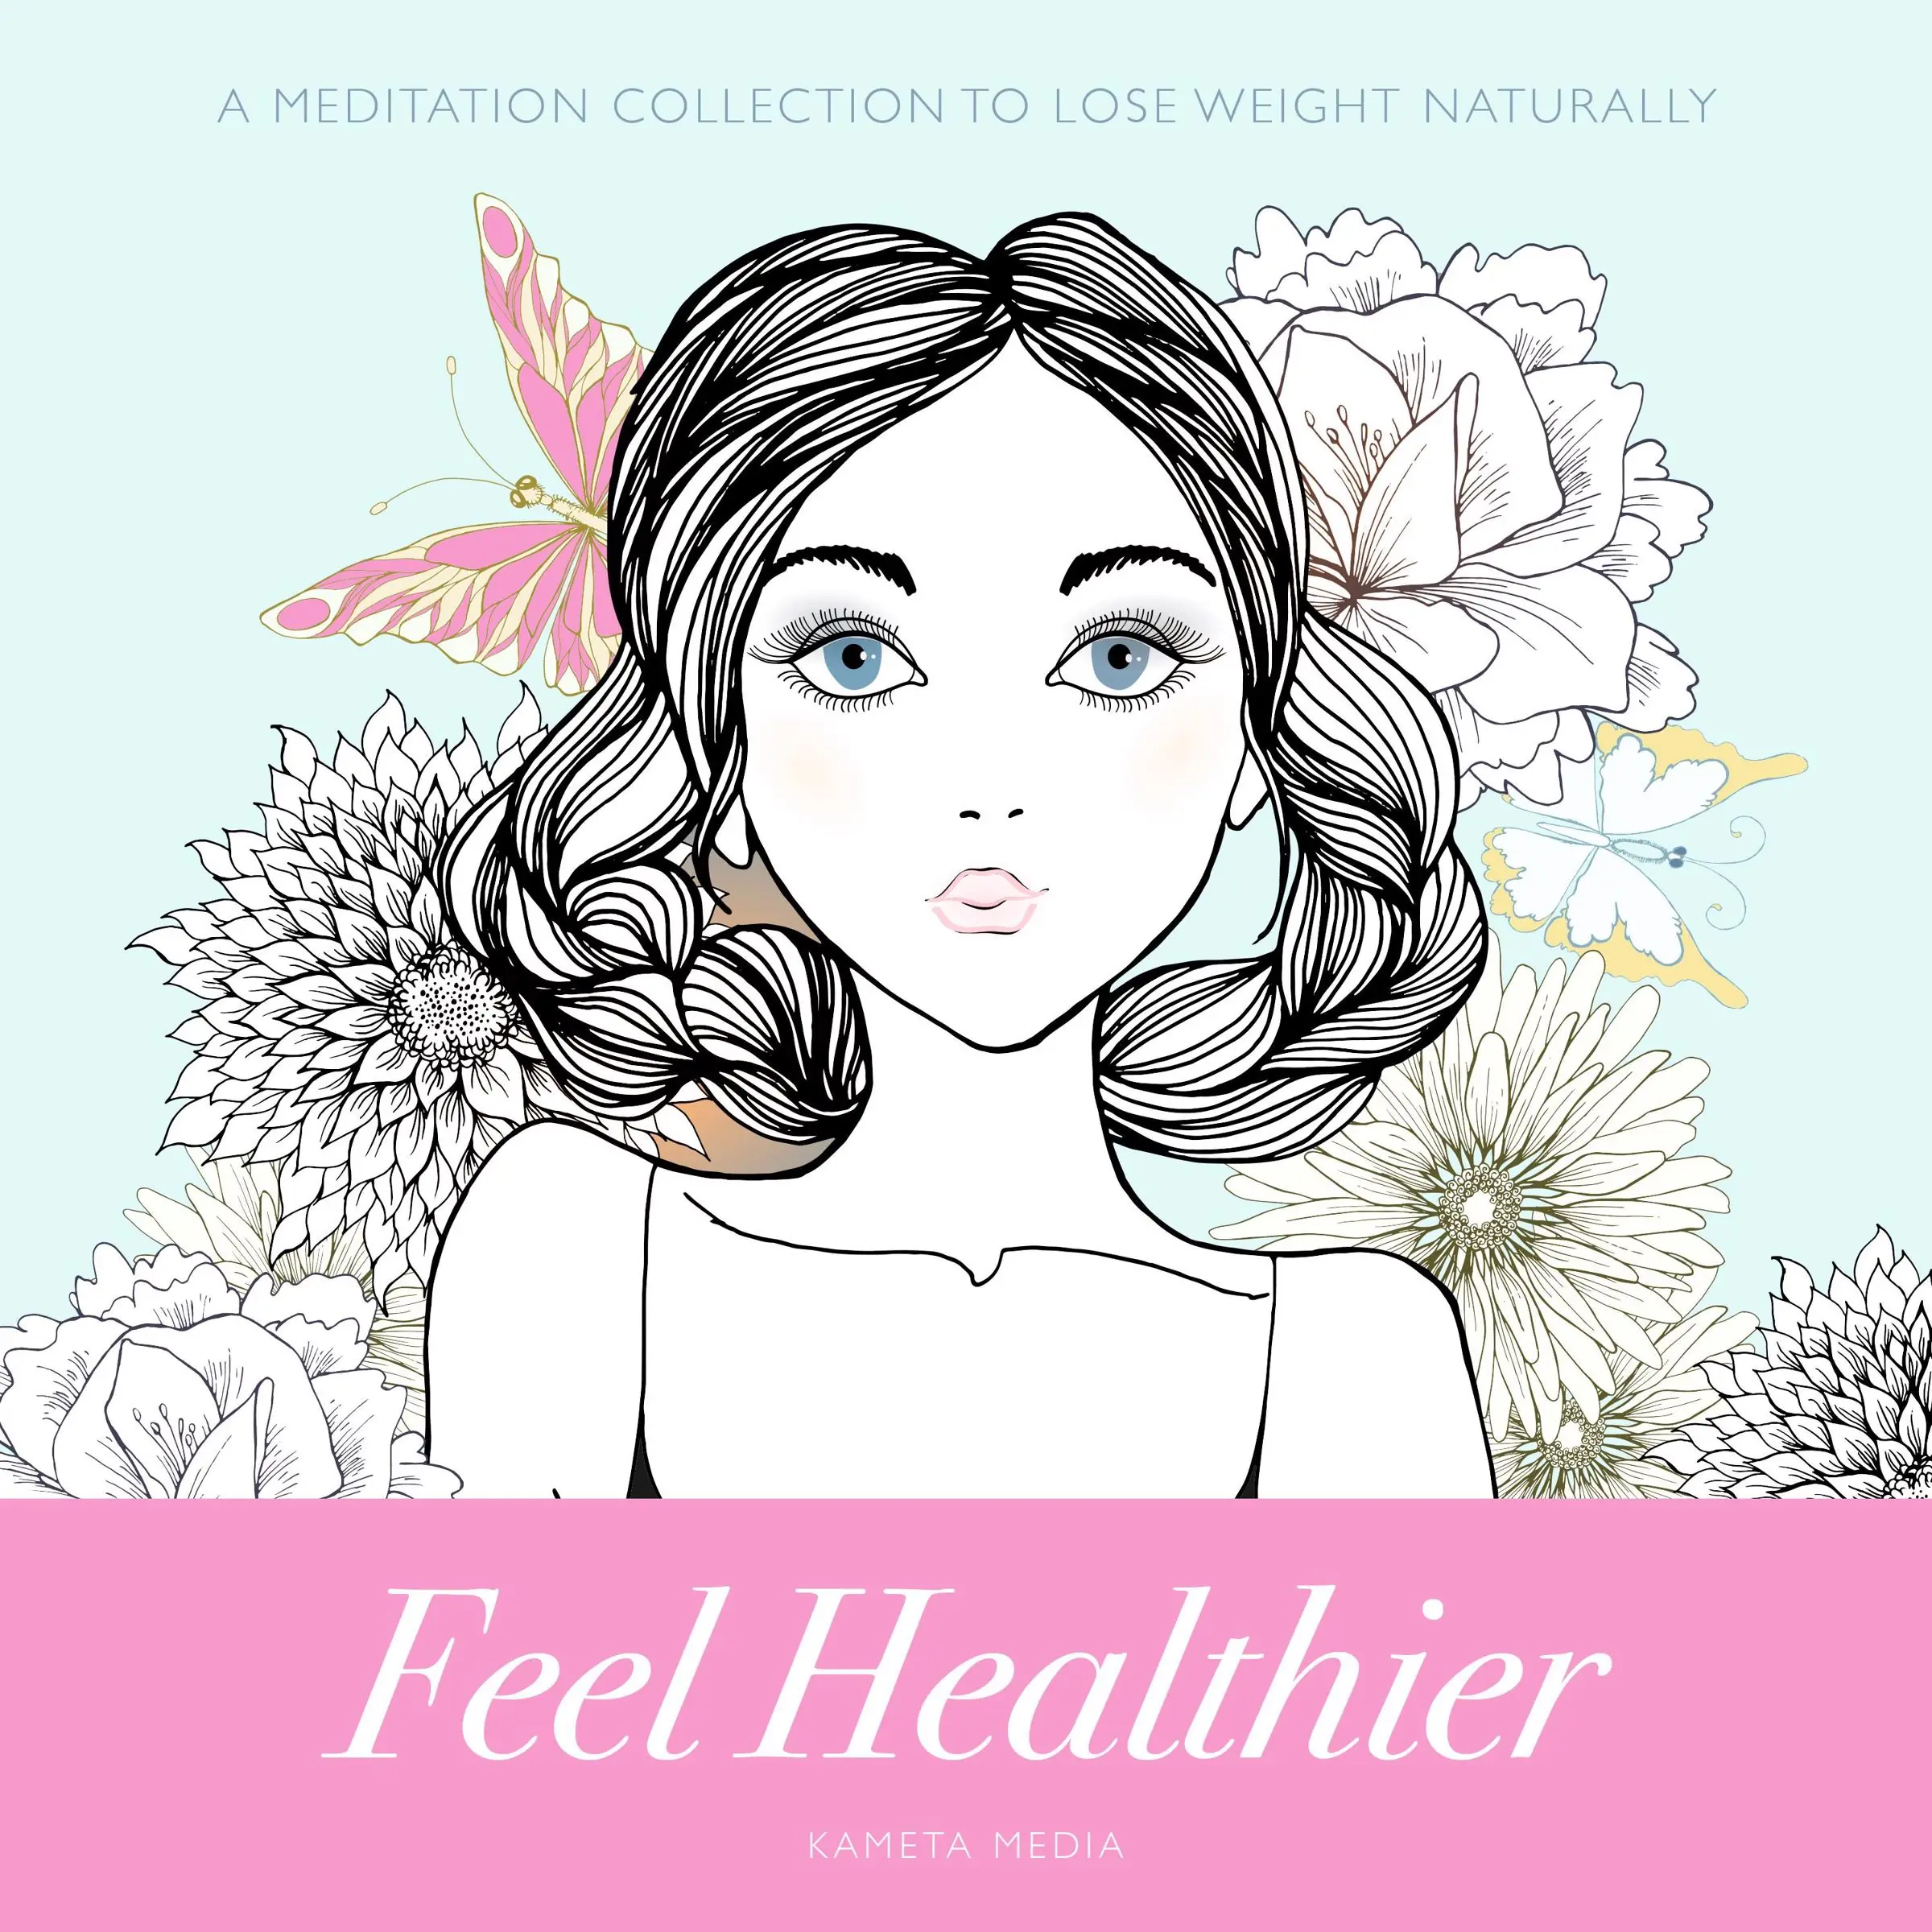 Feel Healthier: A Meditation Collection to Lose Weight Naturally Audiobook by Kameta Media